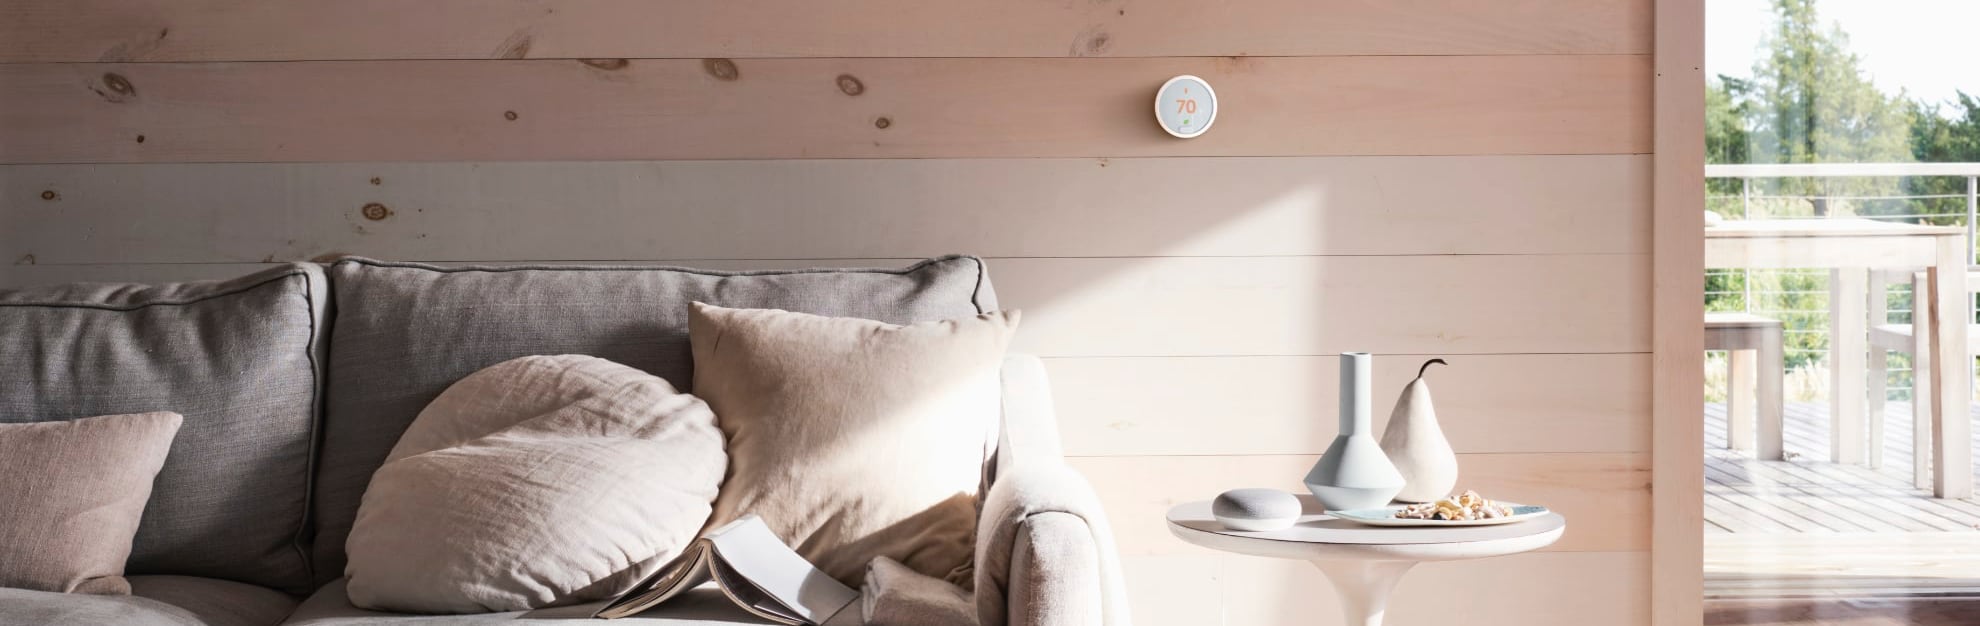 Vivint Home Automation in Bakersfield